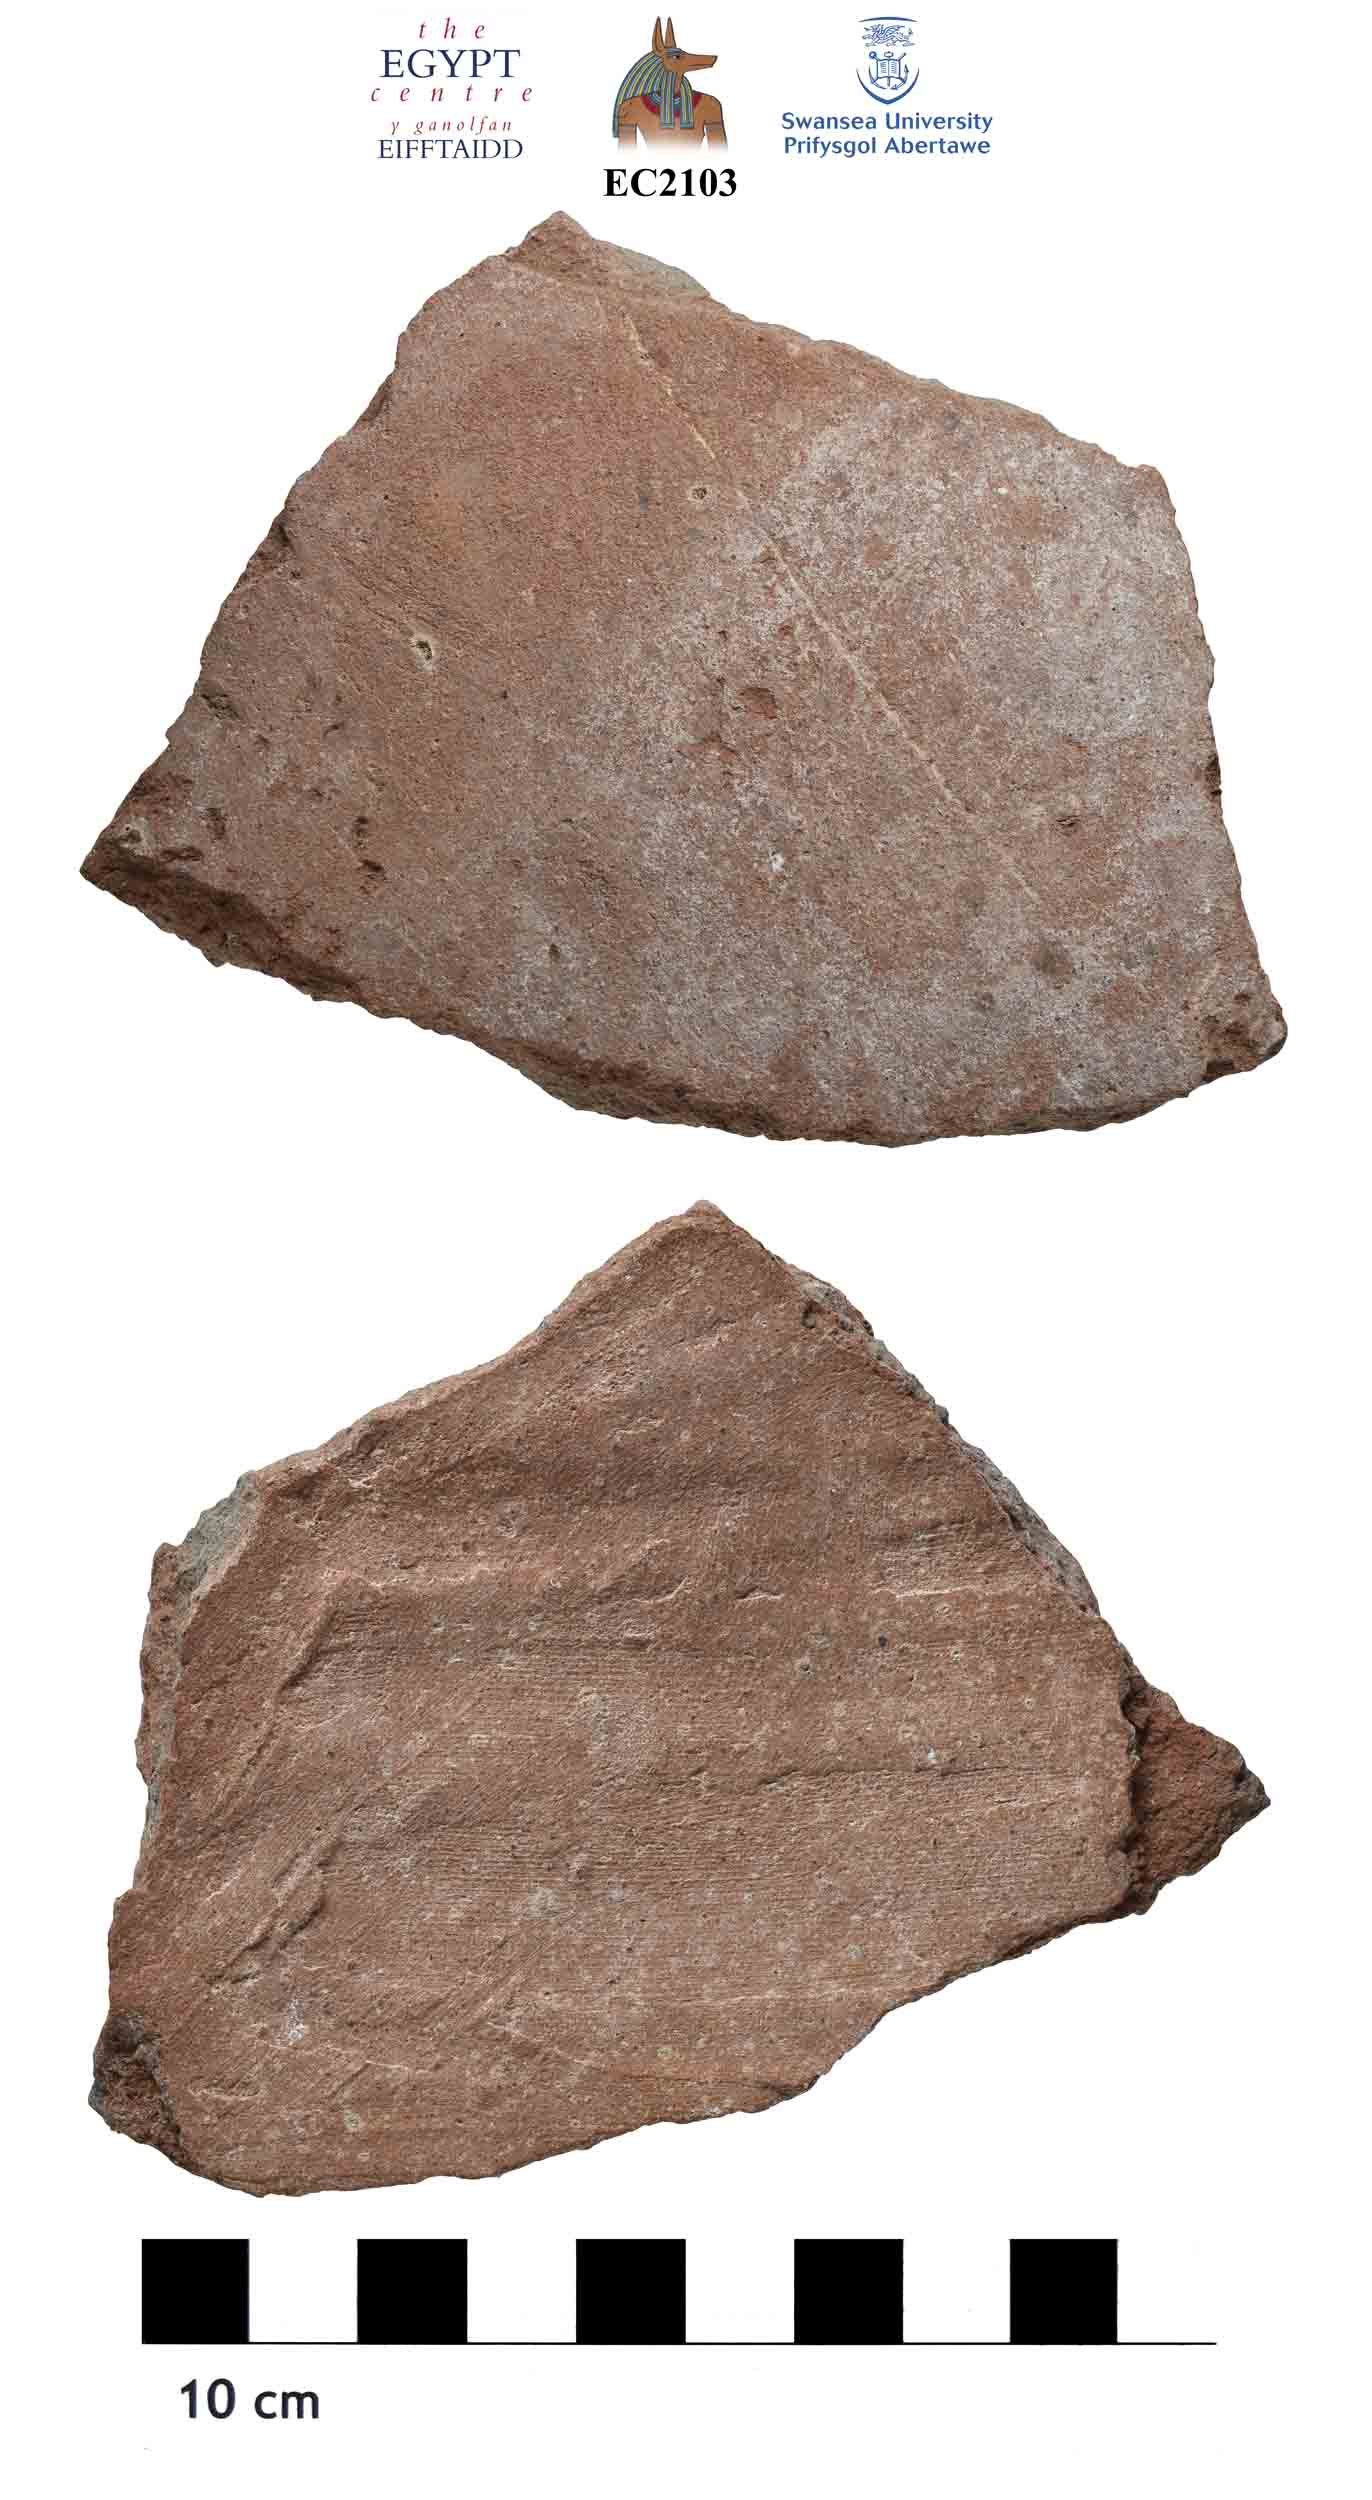 Image for: Pottery sherd